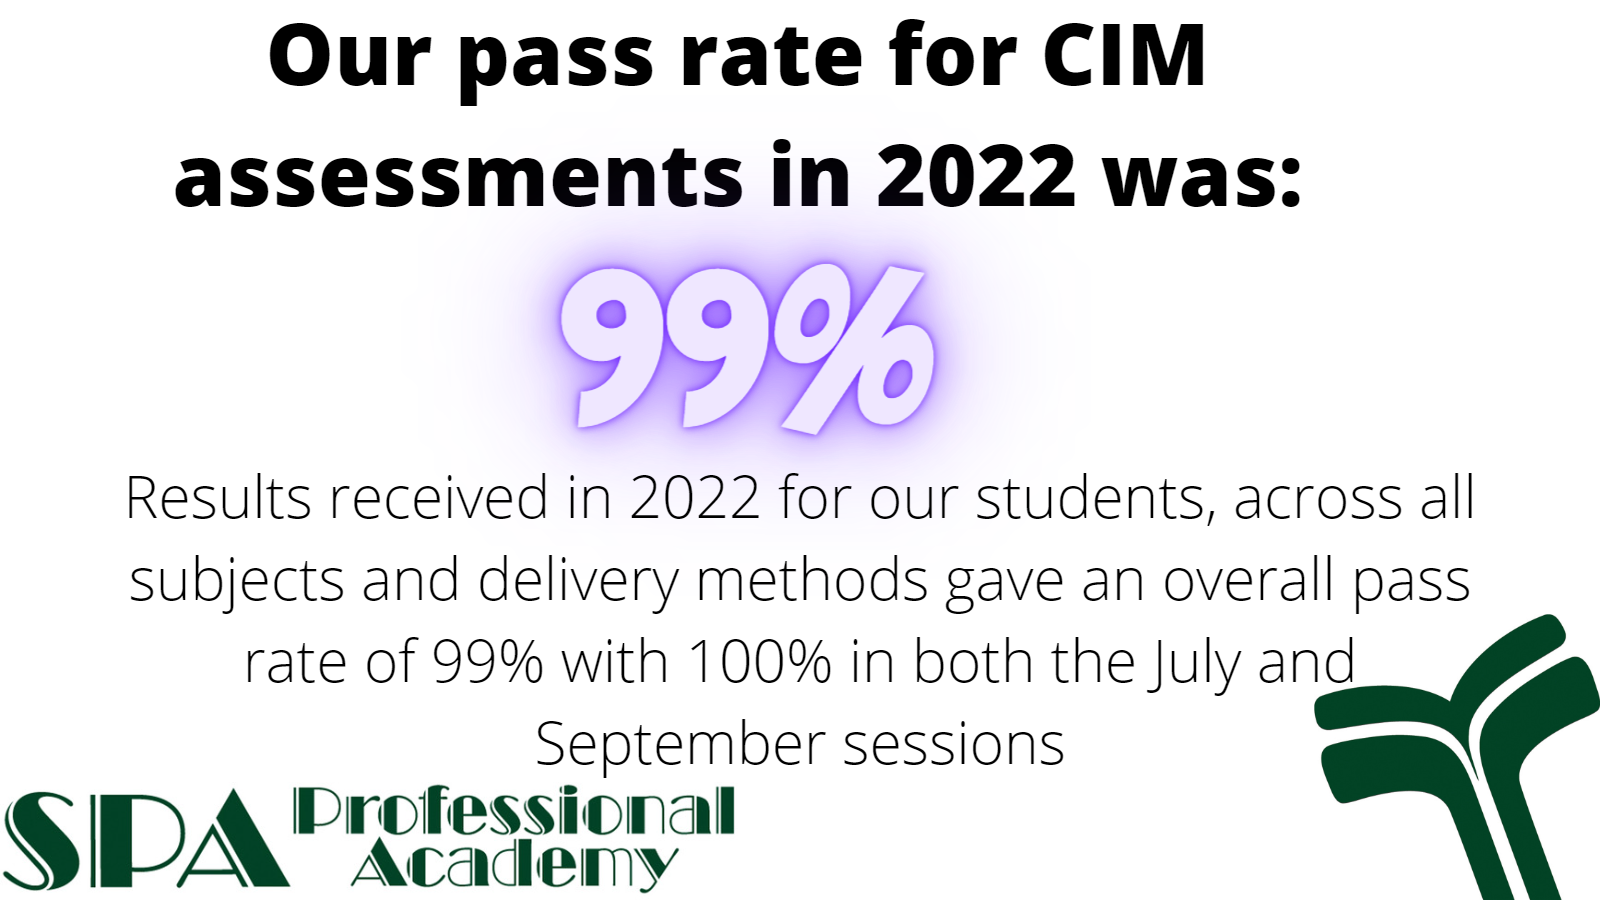 2022 Assessment results